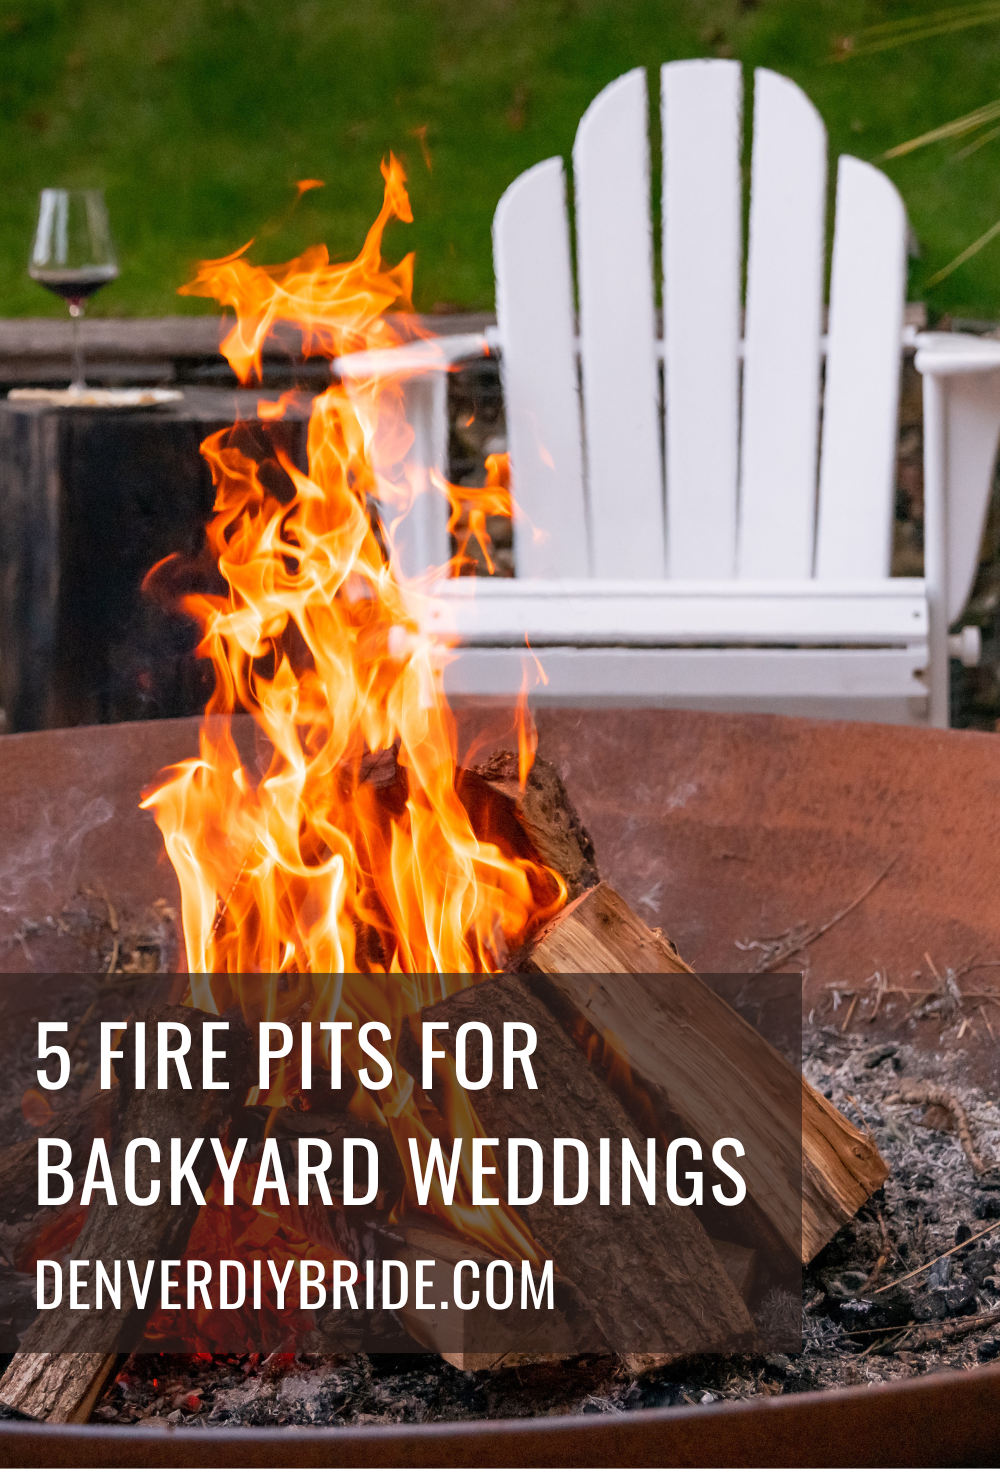 Chair and firepit for backyard weddings. 